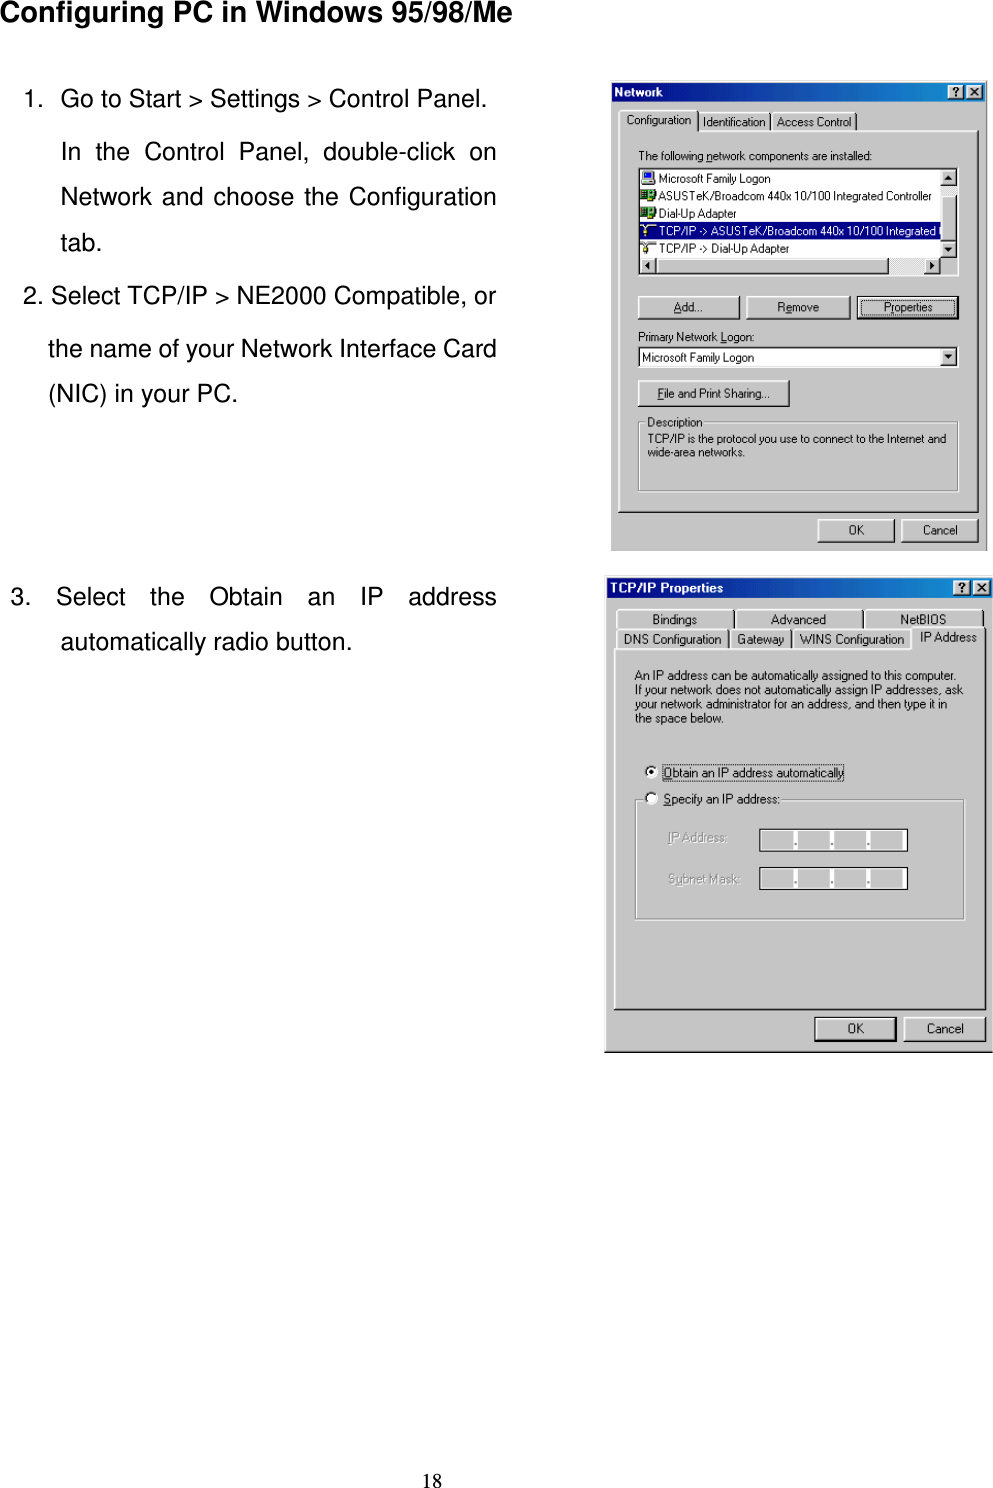   18Configuring PC in Windows 95/98/Me  1.  Go to Start &gt; Settings &gt; Control Panel.  In  the  Control  Panel,  double-click  on Network and choose the Configuration tab. 2. Select TCP/IP &gt; NE2000 Compatible, or the name of your Network Interface Card (NIC) in your PC.   3.  Select  the  Obtain  an  IP  address automatically radio button.  